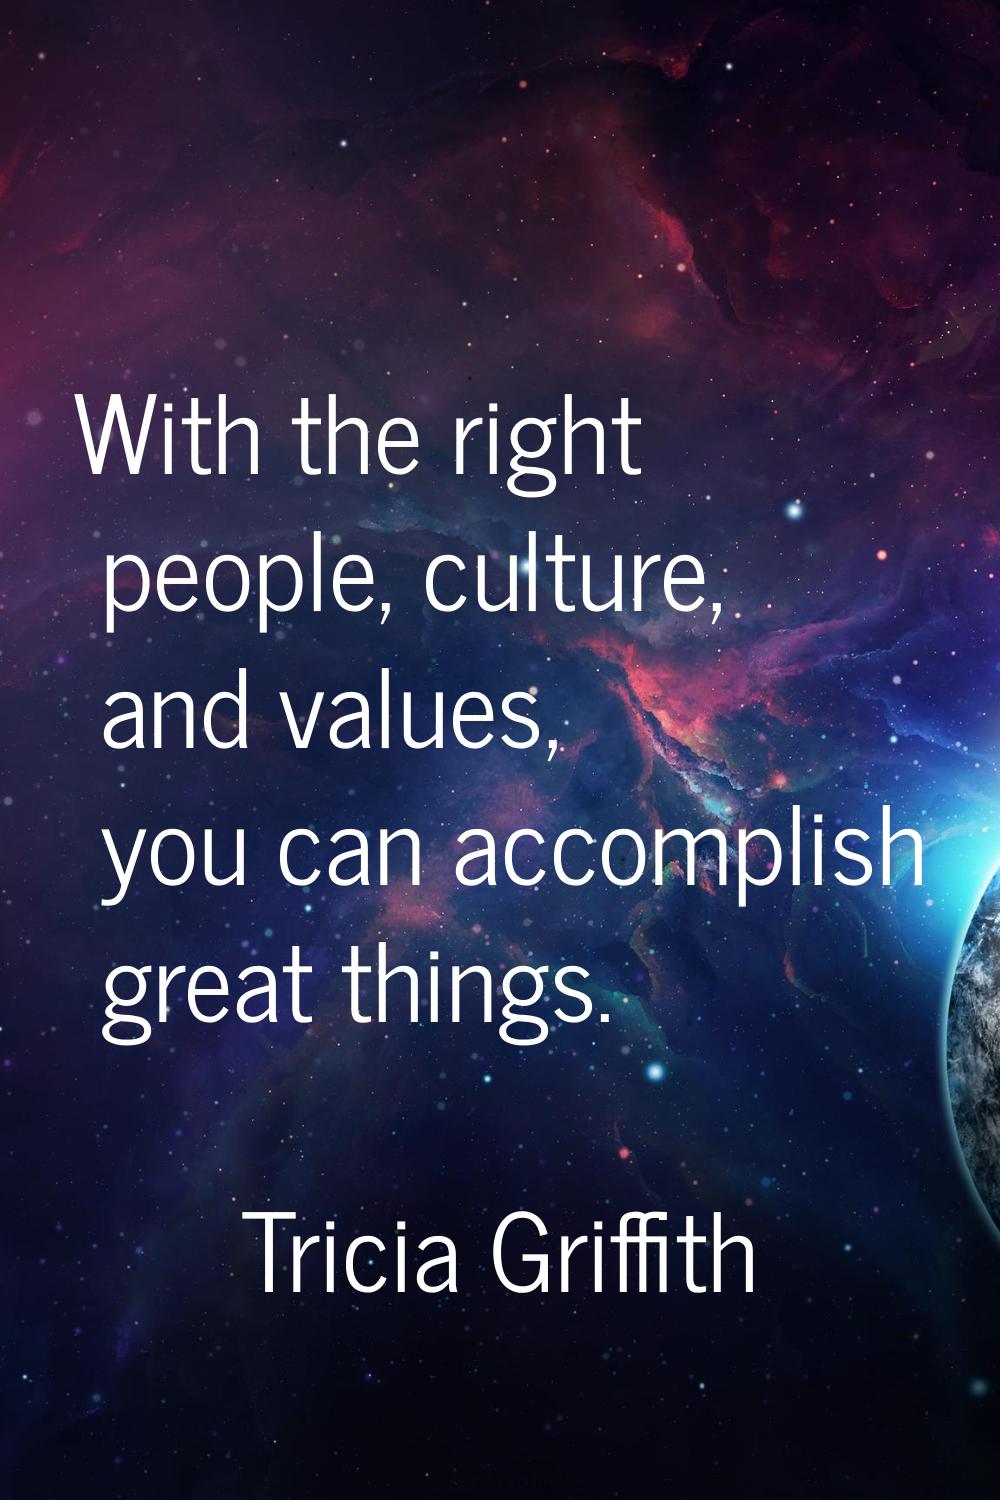 With the right people, culture, and values, you can accomplish great things.